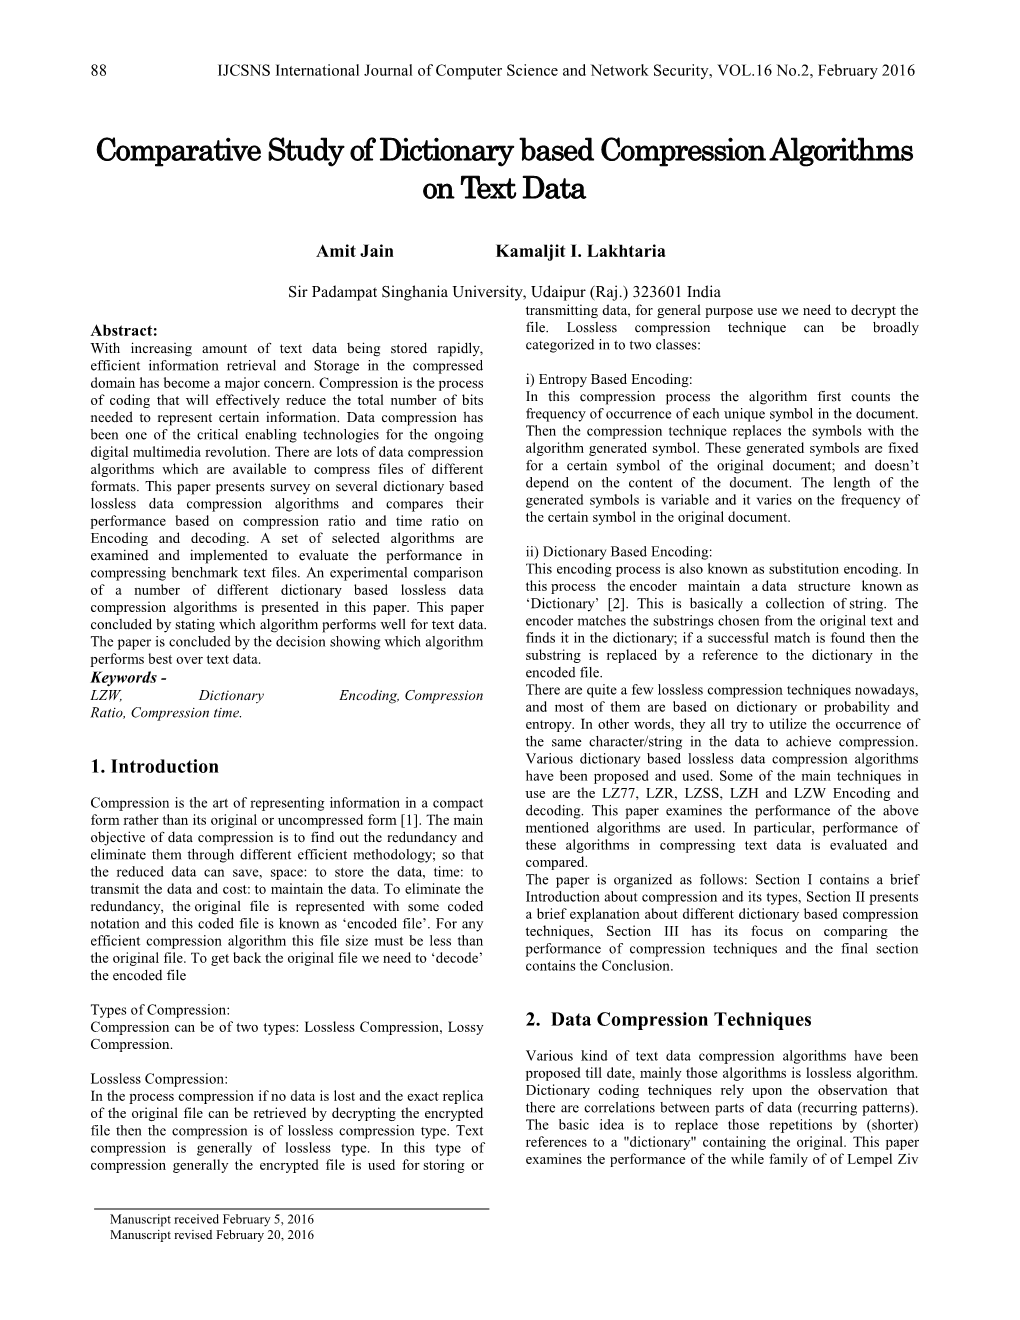 Comparative Study of Dictionary Based Compression Algorithms on Text Data